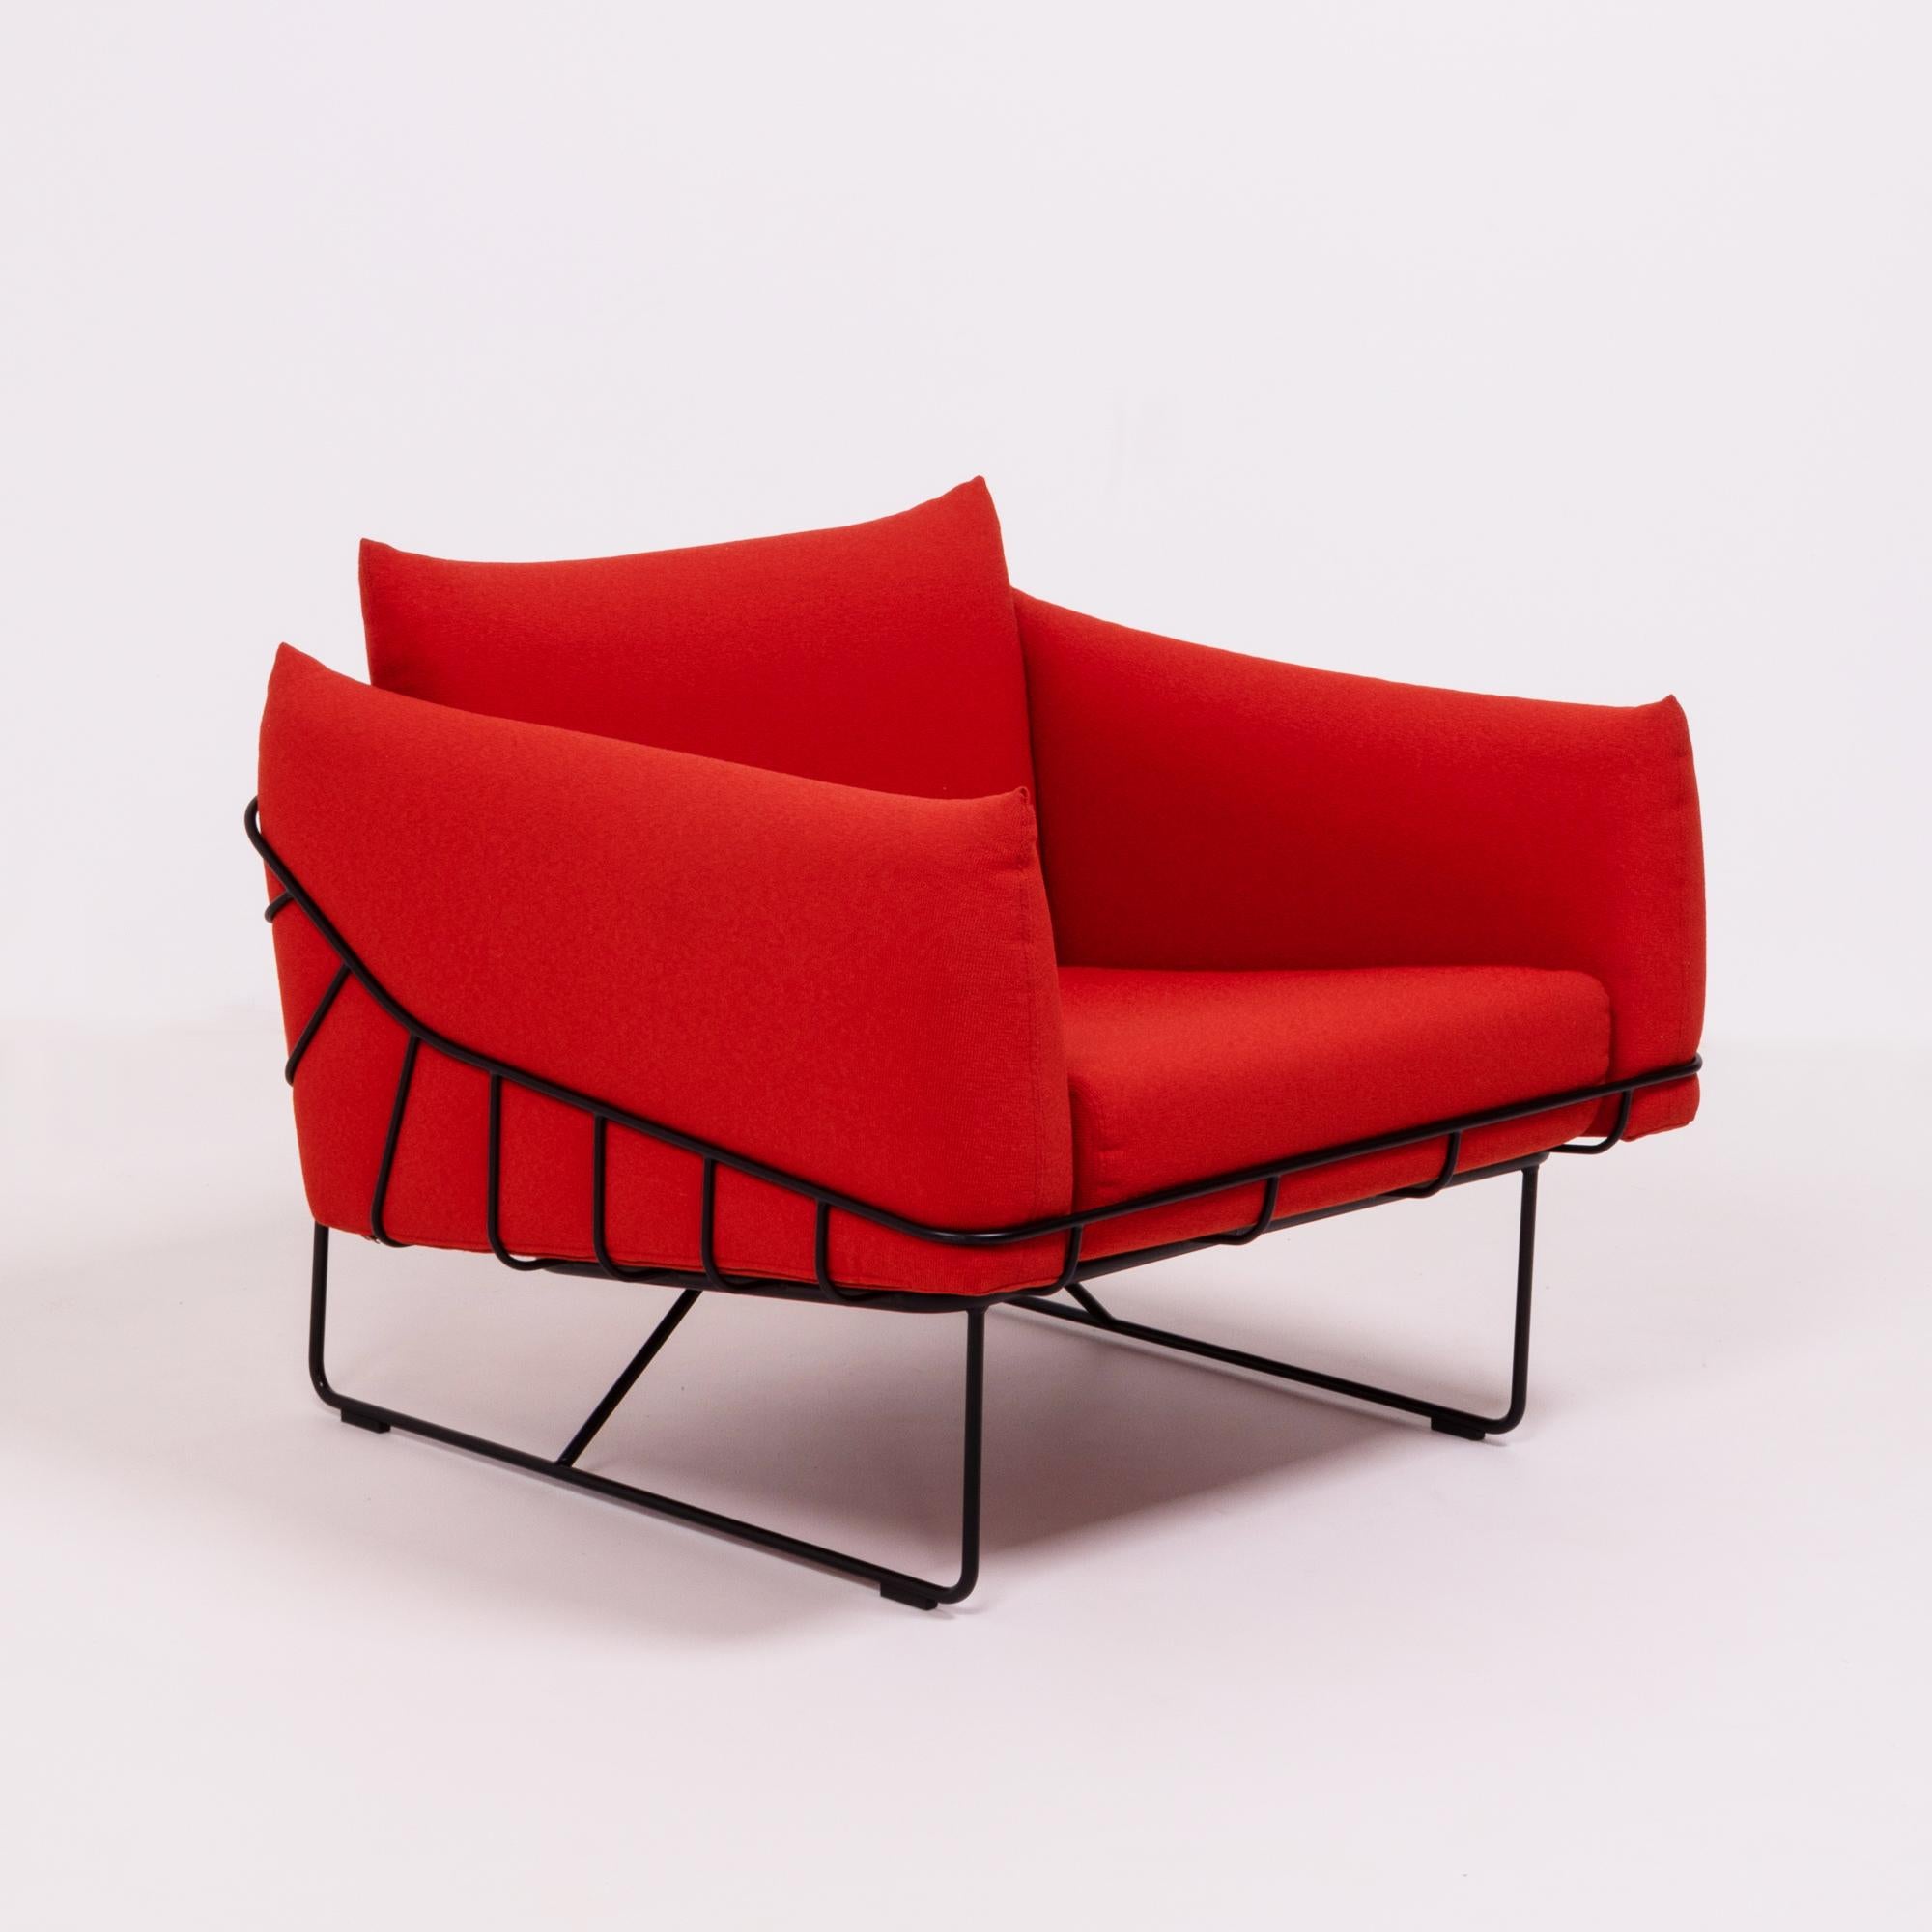 American Red Wireframe Lounge Chairs by Herman Miller, 2013, set of 2